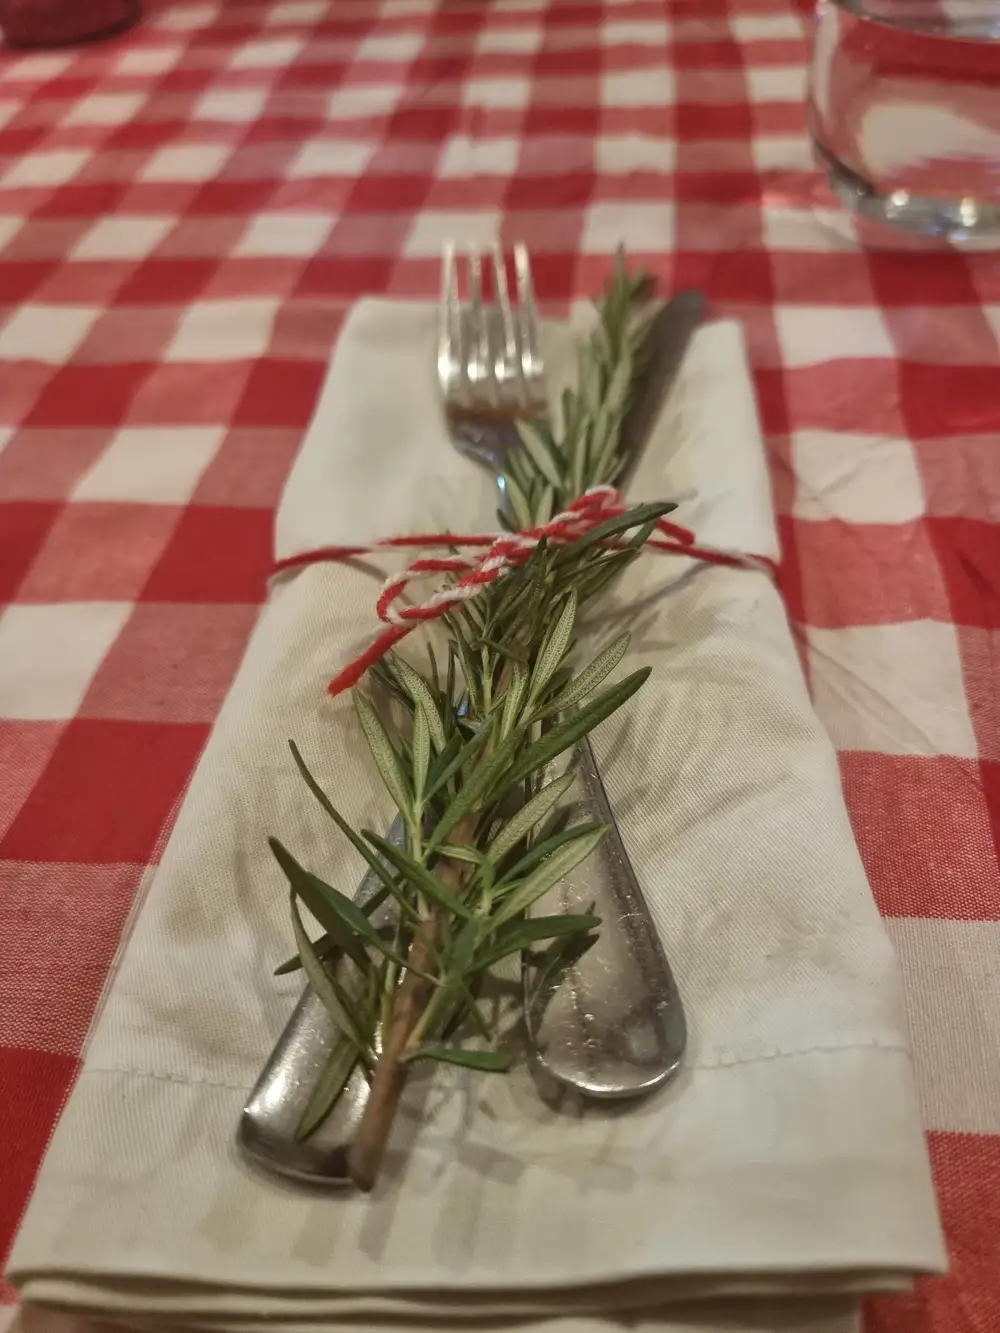 A decorated cutlery